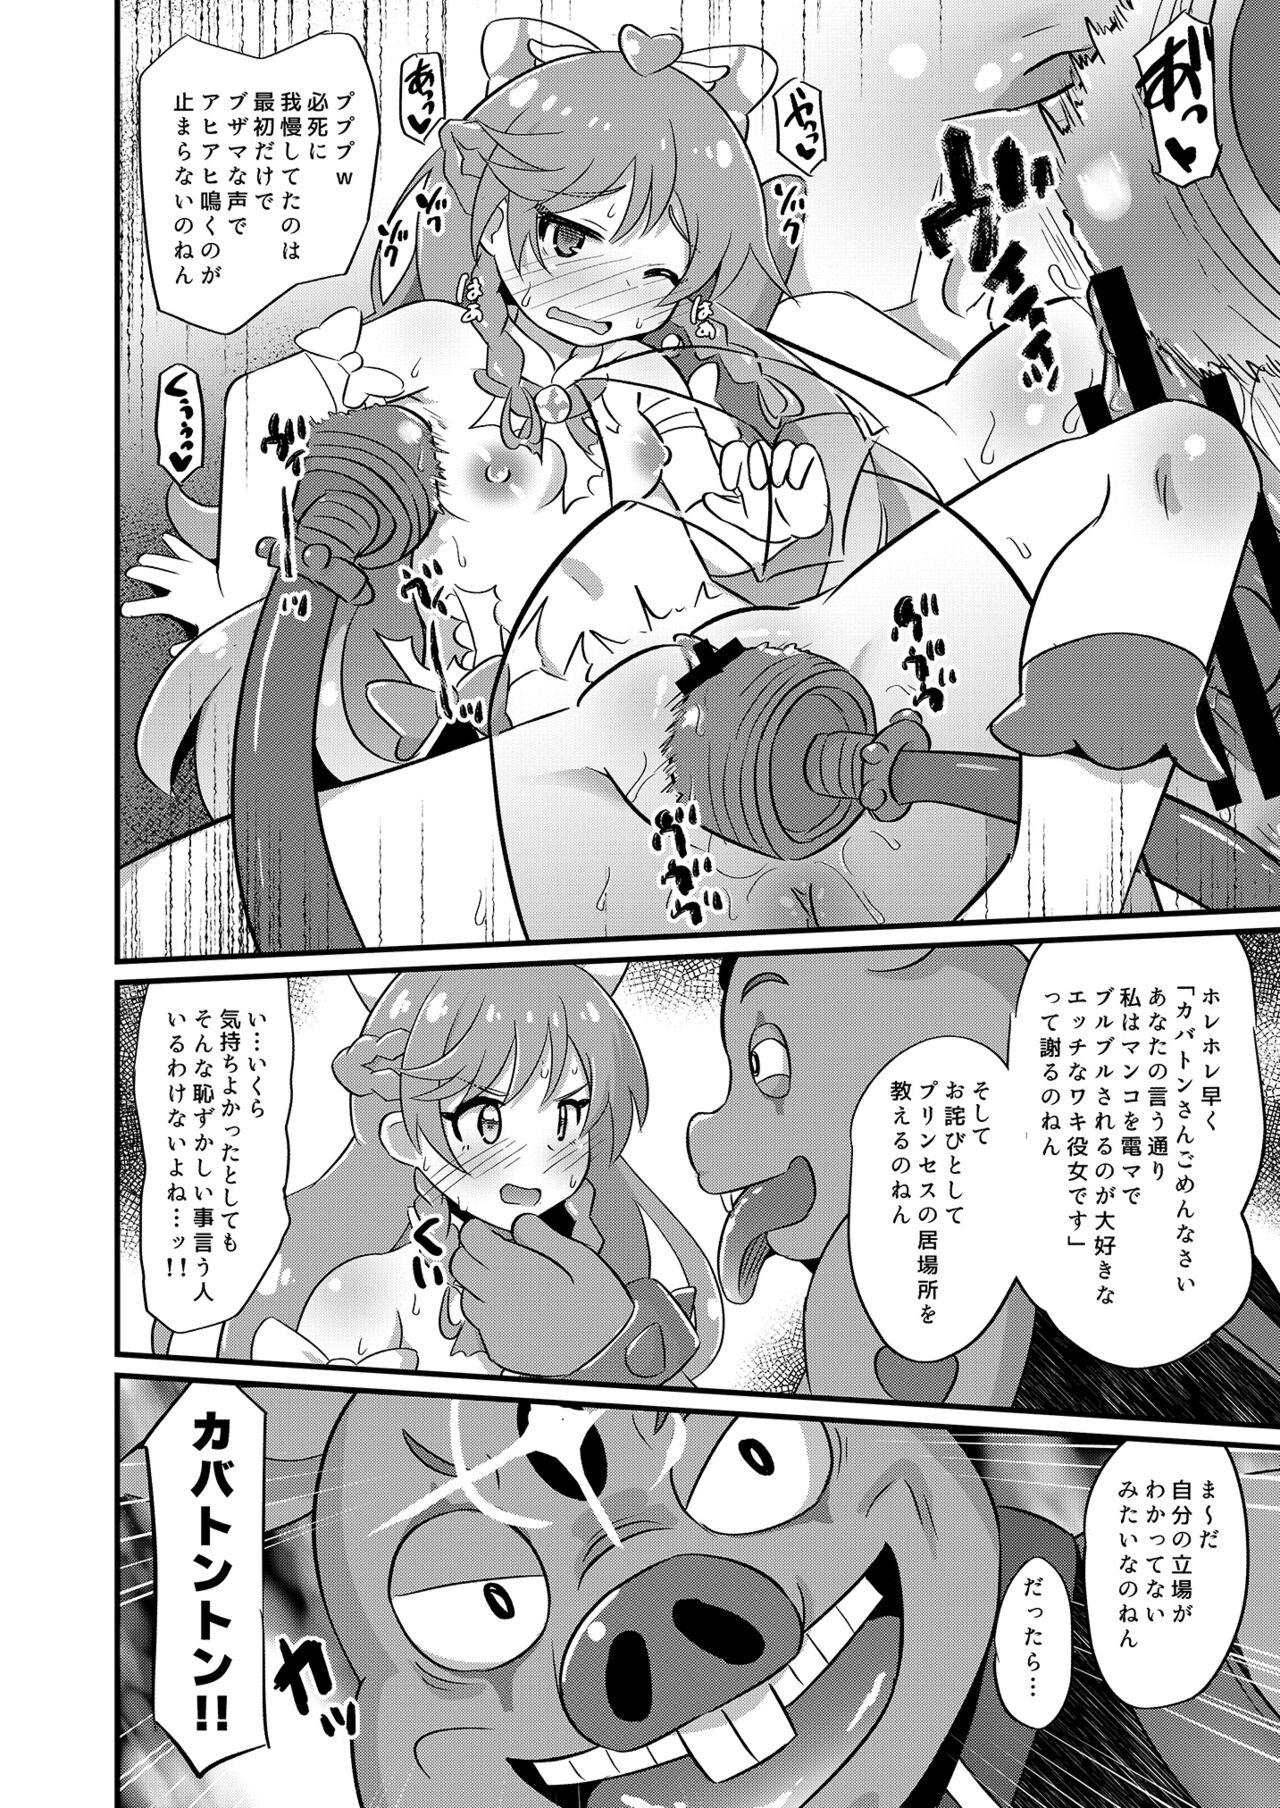 Beurette 敗北キ○アプリズム Tease - Page 9